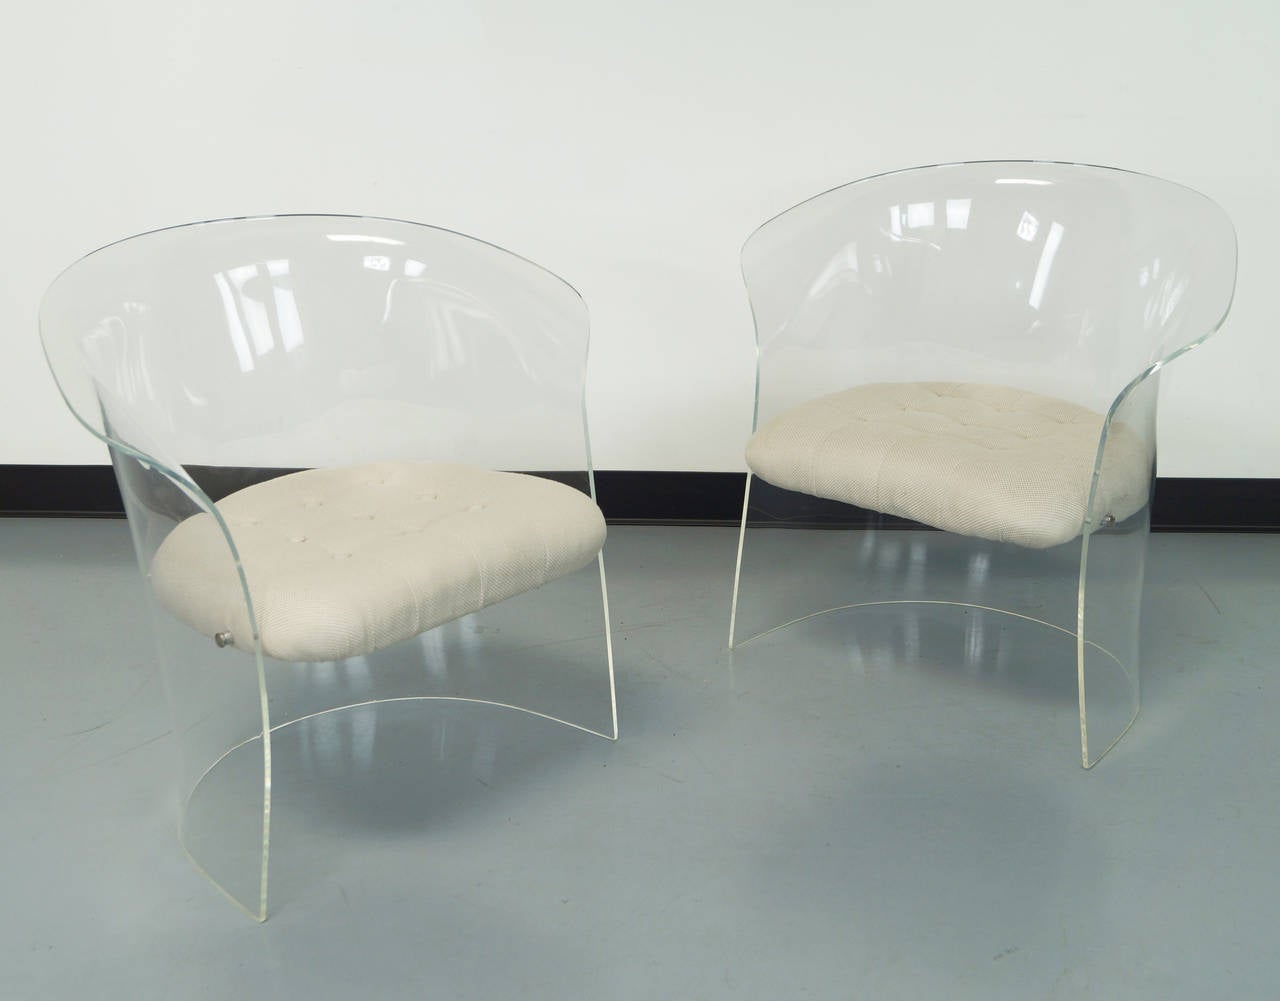 Pair of flexuous Lucite lounge chairs, circa early 1970s. These chairs have curved backs and sides and the seats are attached by chrome covers.